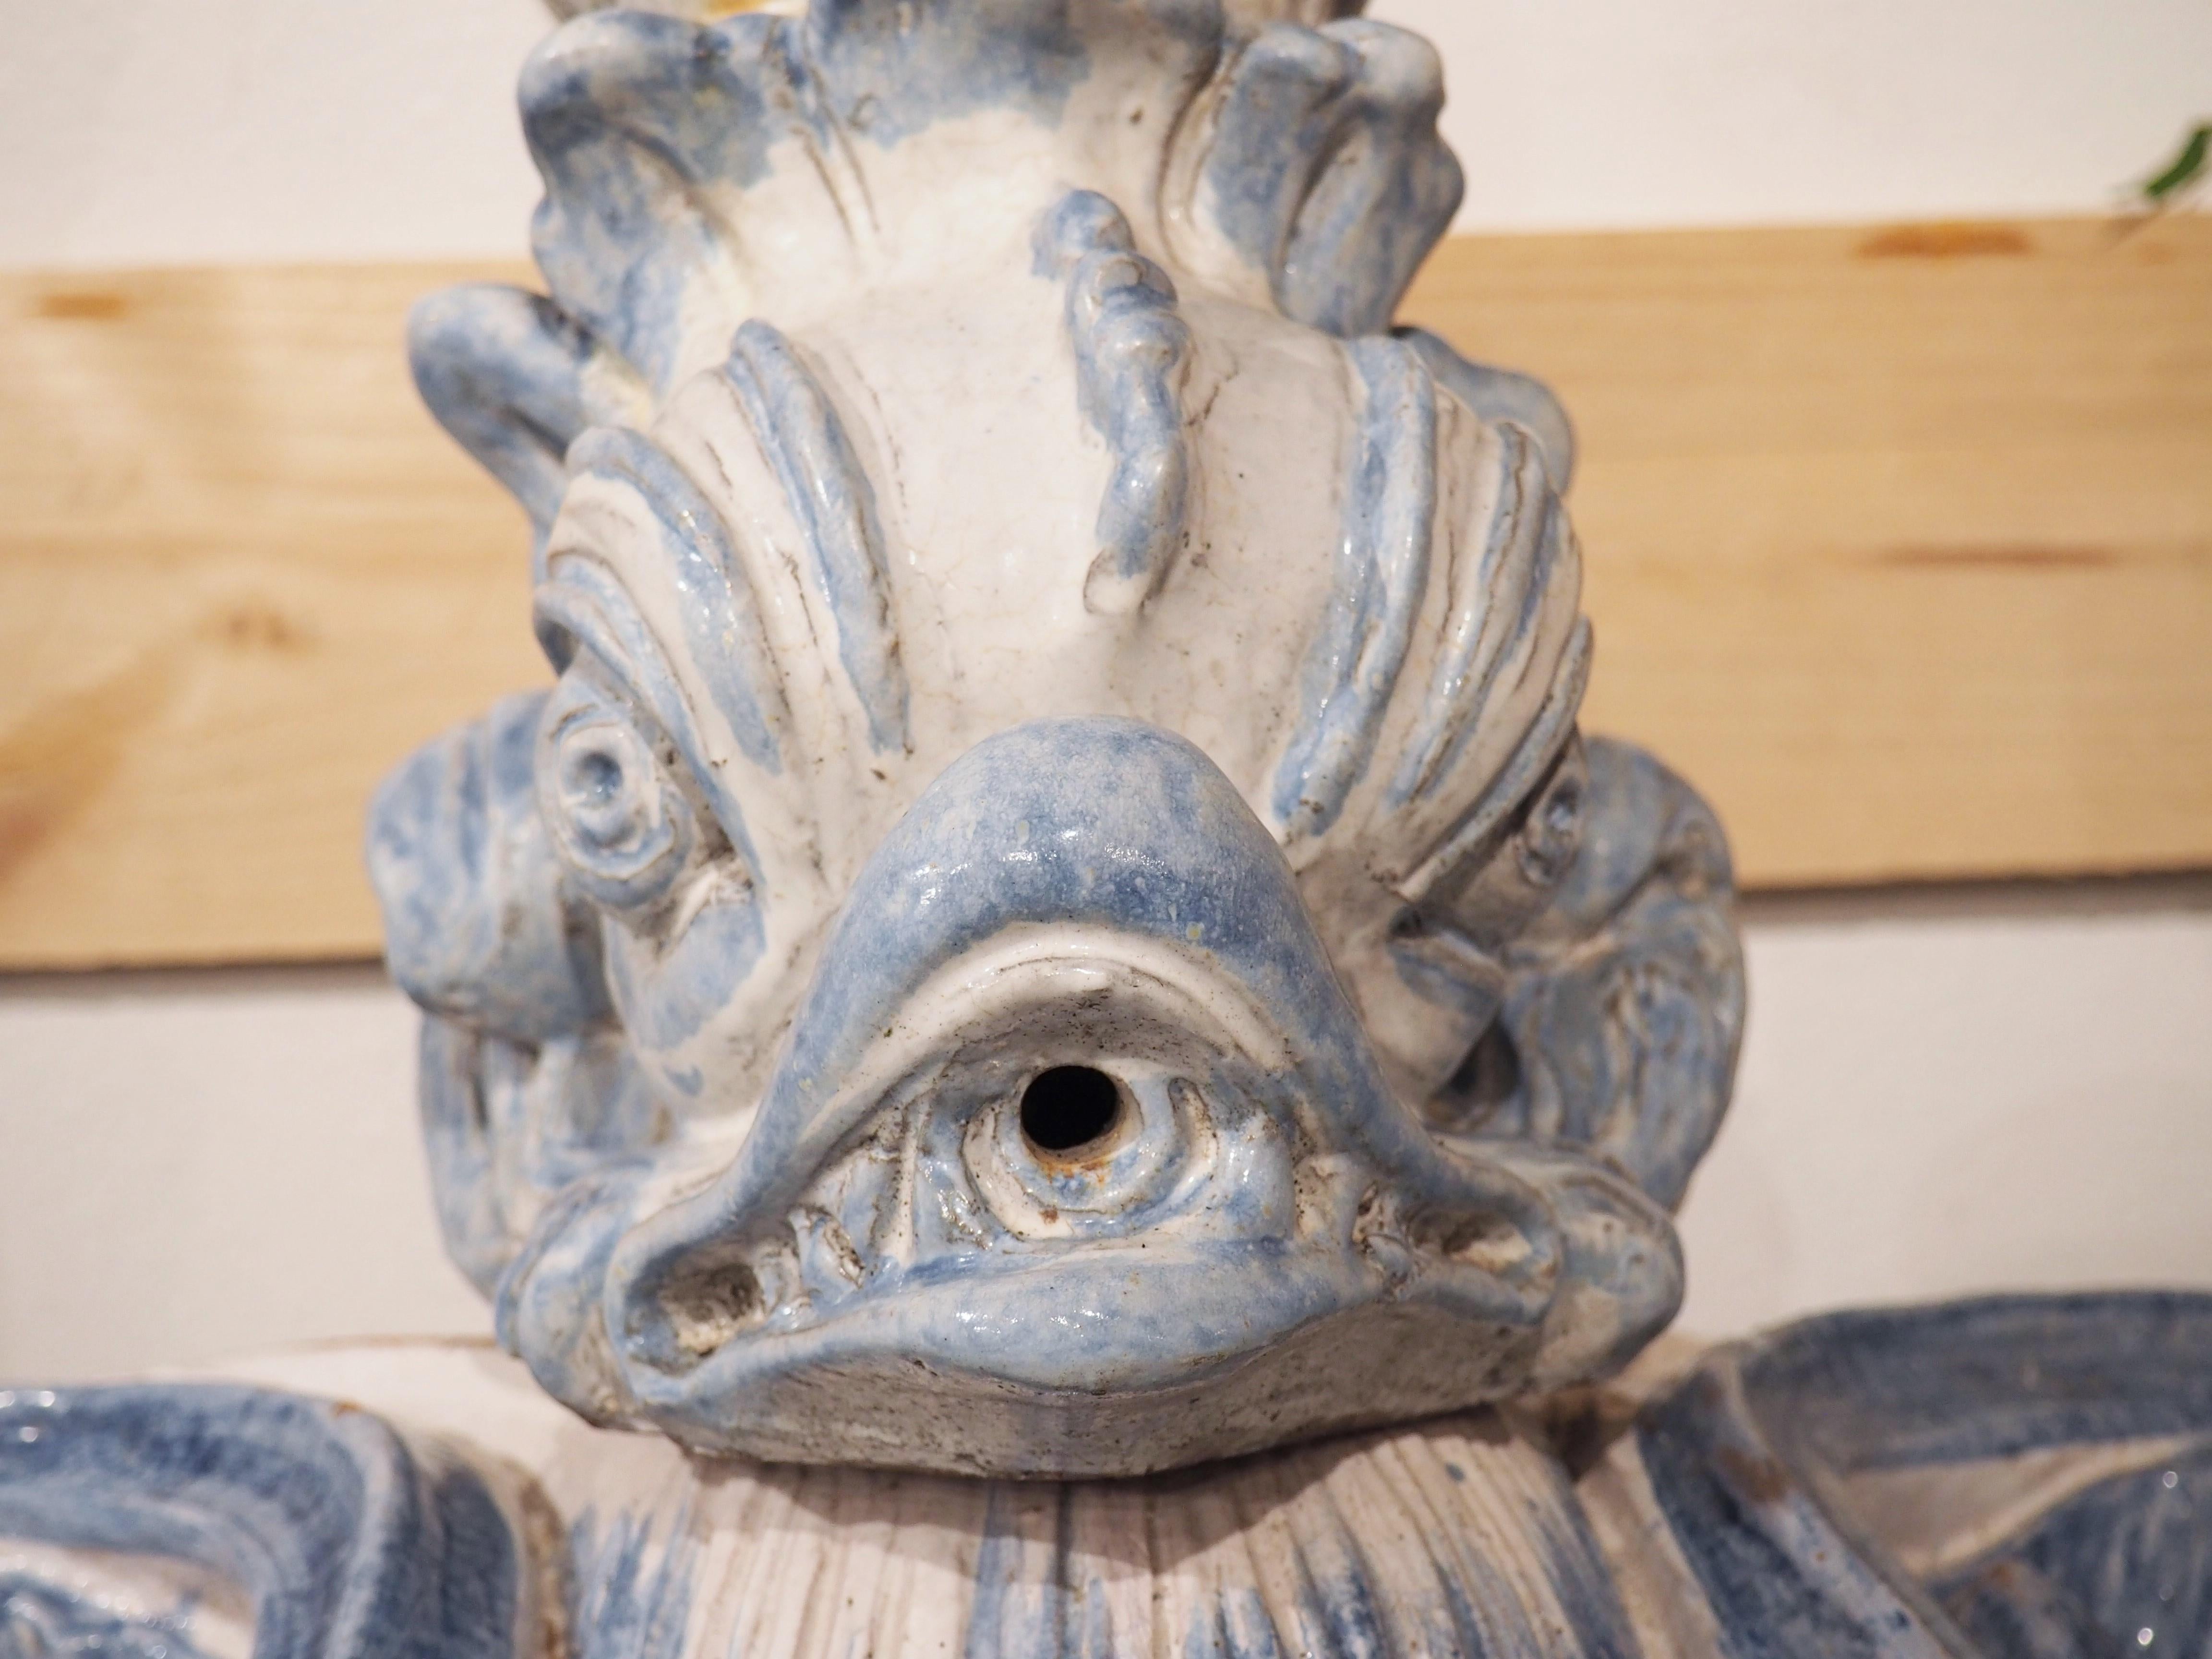 Made from tin-glazed pottery, known as faience, this antique French interior wall fountain is from circa 1880. All three sections that comprise the fountain have been hand painted in cobalt blue and white, reminiscent of Delftware that was popular